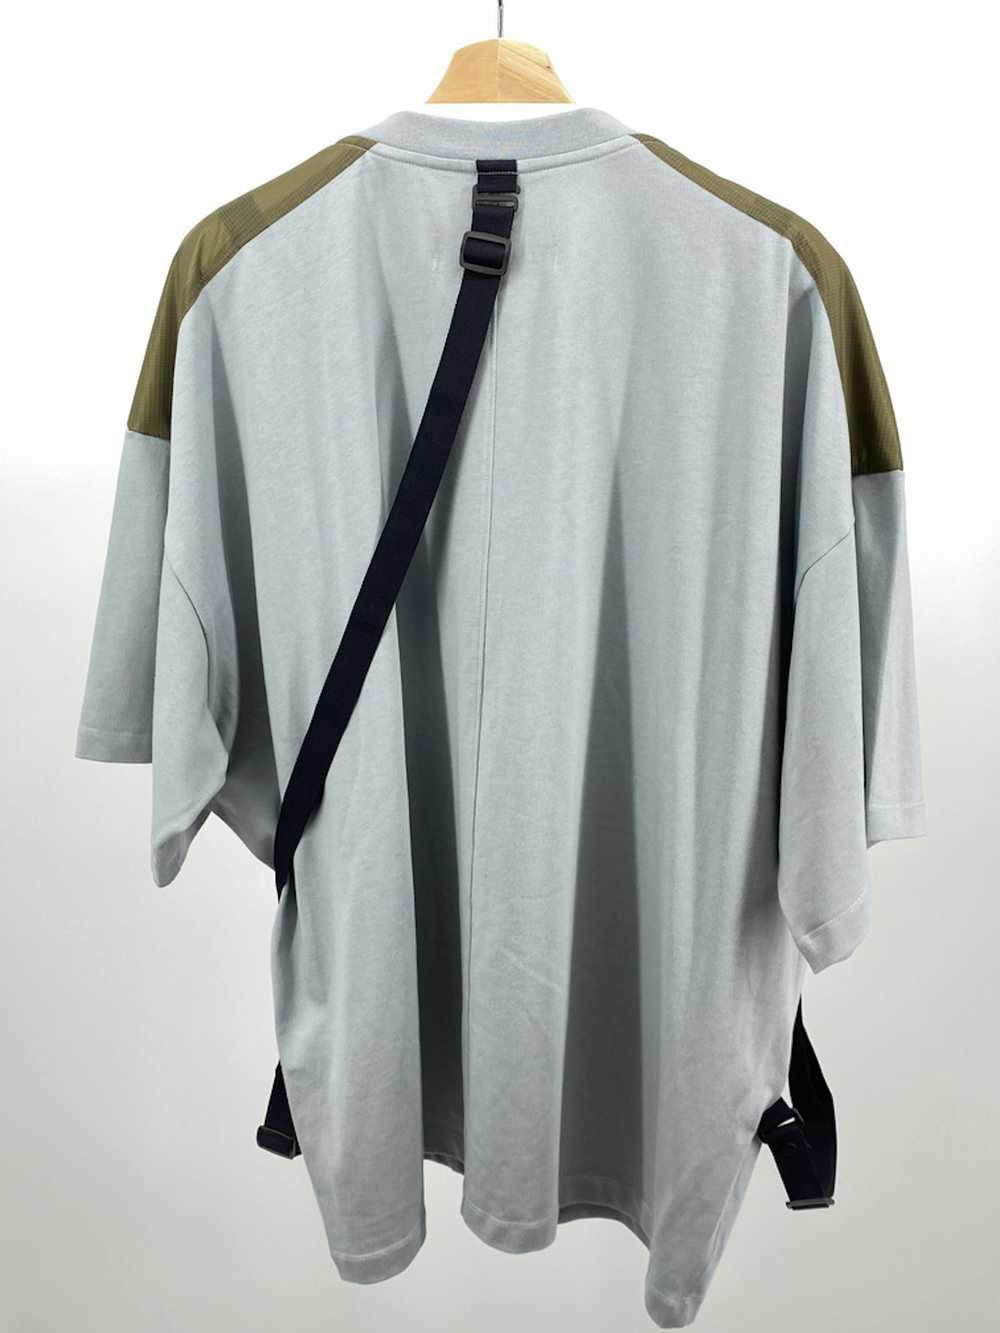 A. A. Spectrum Tactical Military T-Shirt - image 2